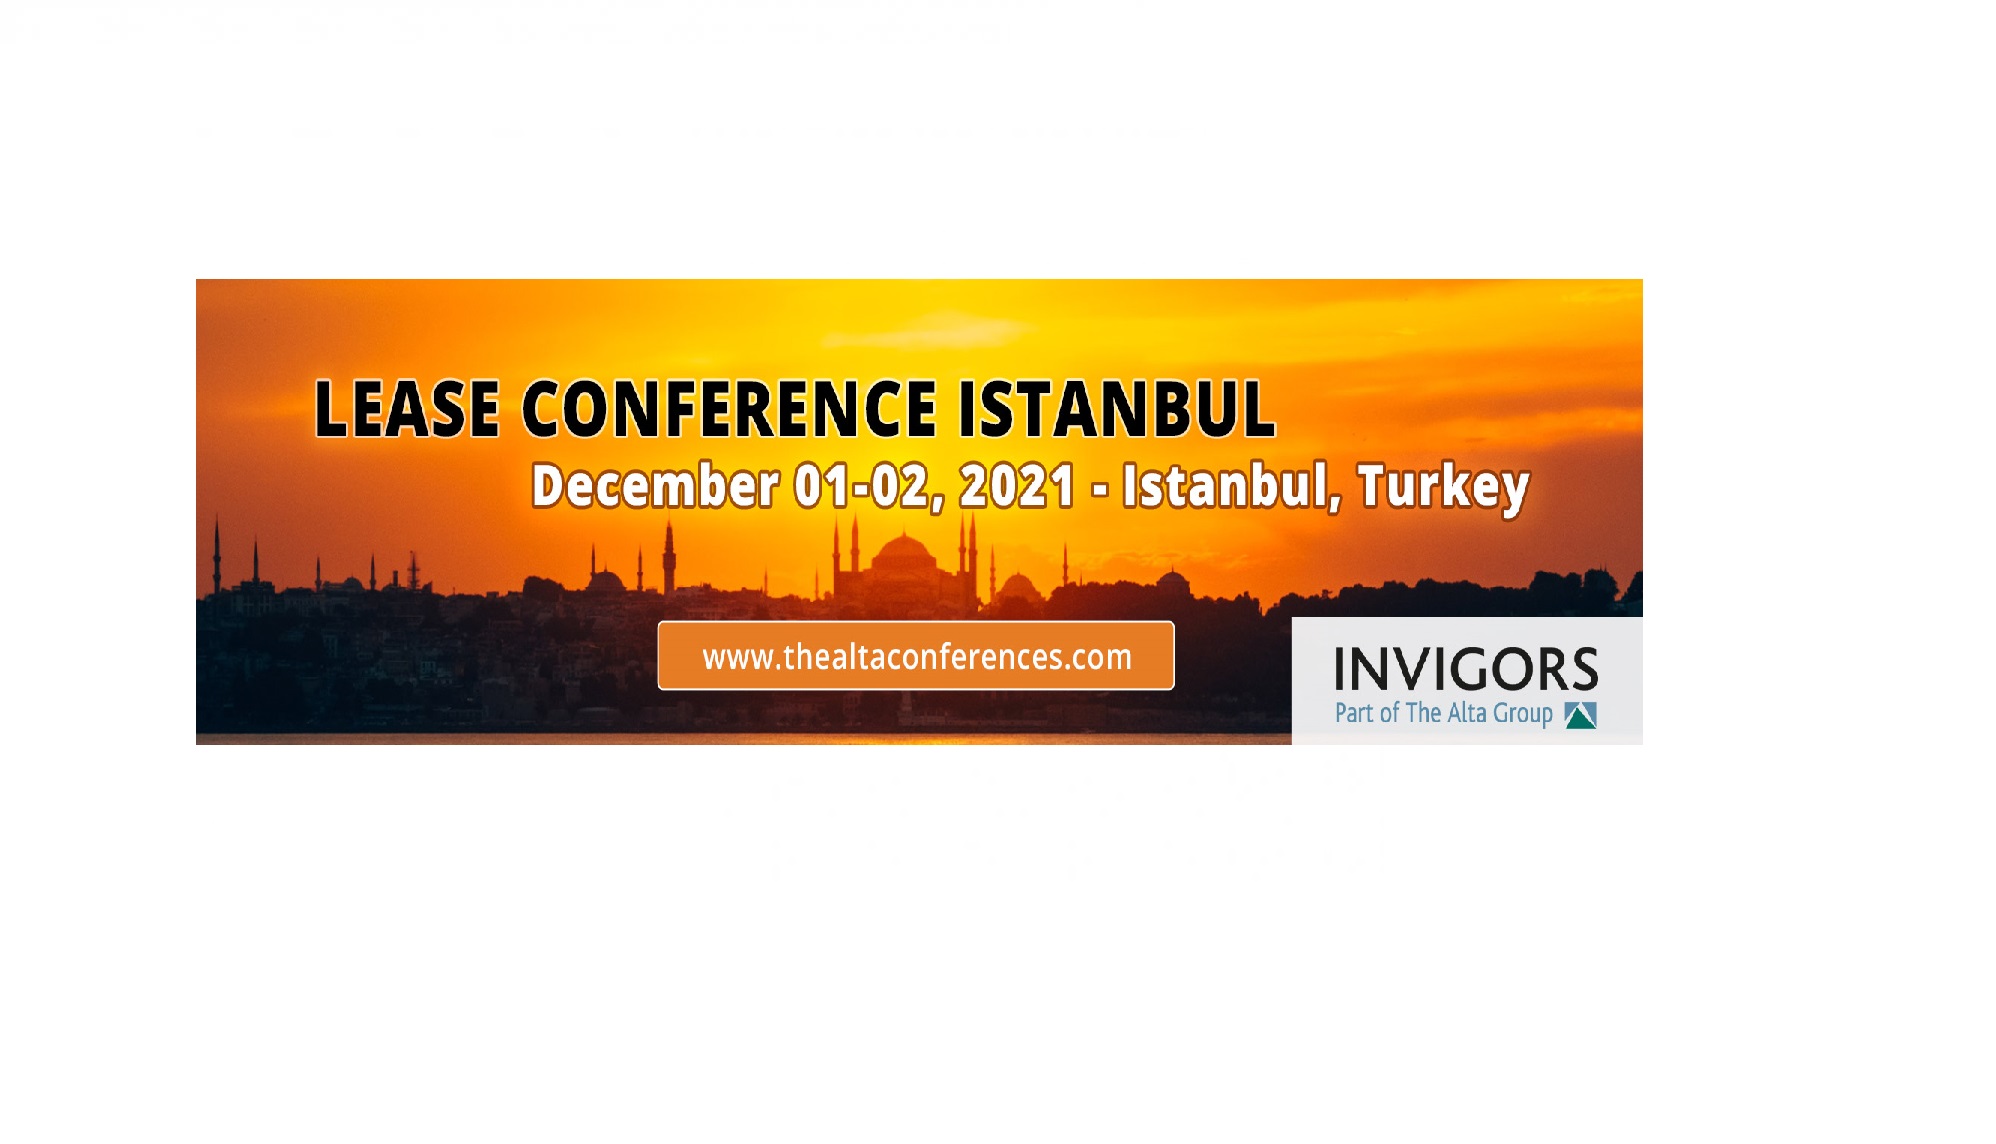 Lease Conference Istanbul 2021